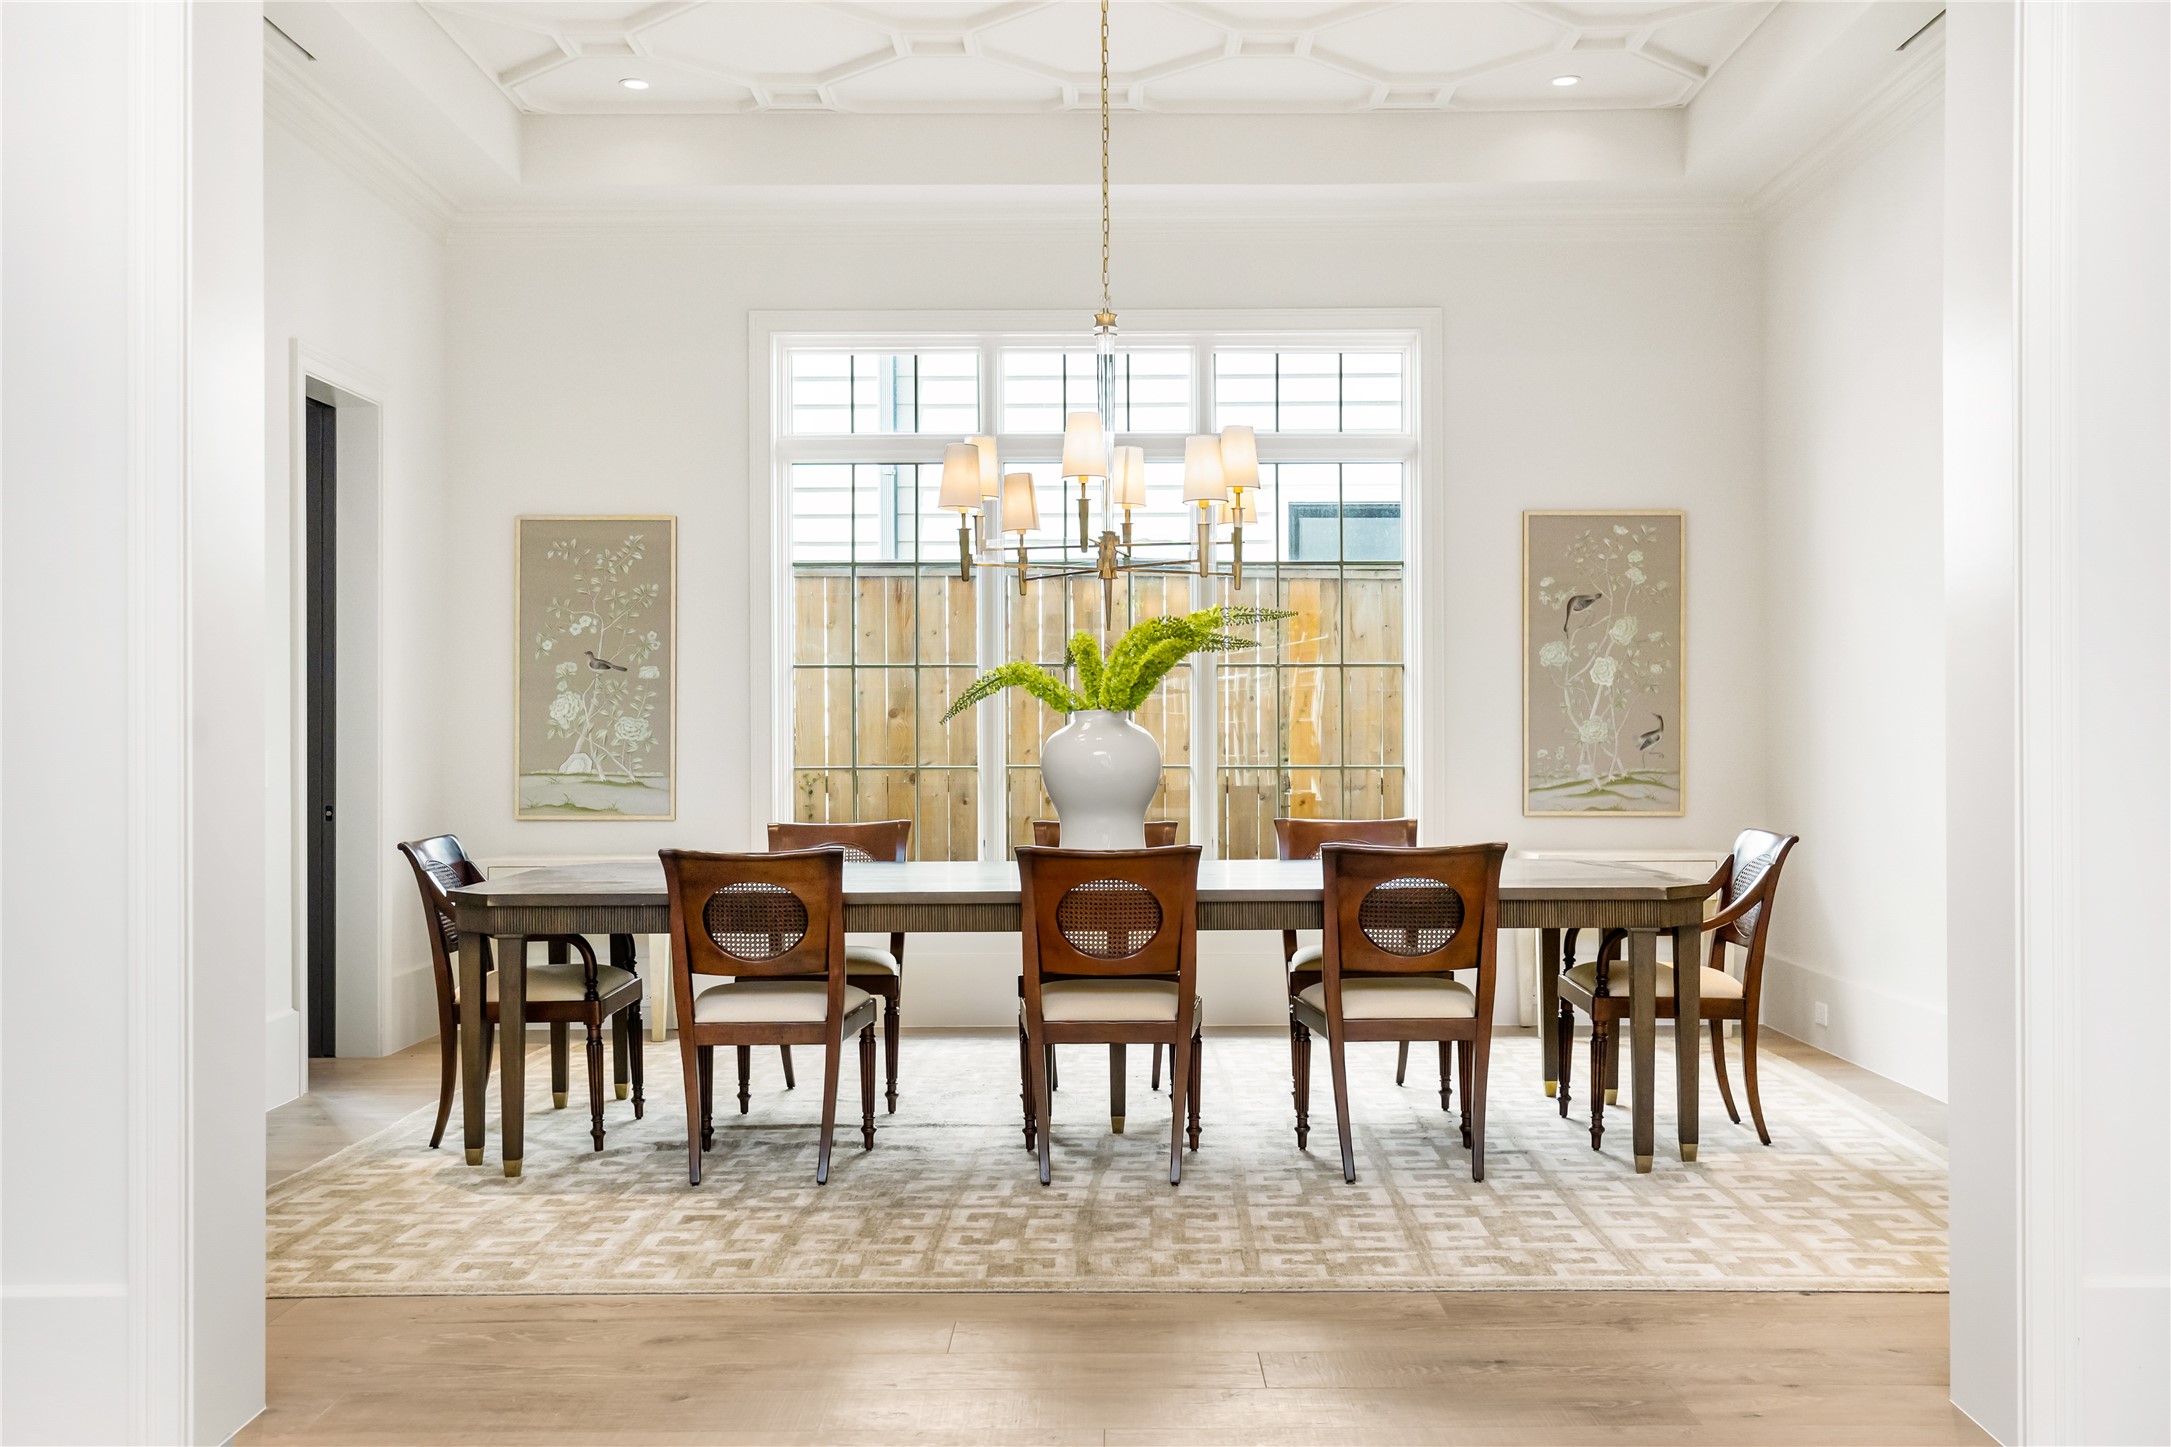 Fabulous dining room located just off the entry impresses with designer lighting and custom plaster moulding detailing on the ceiling. A stunning butler's pantry/bar area offers convenience while entertaining.